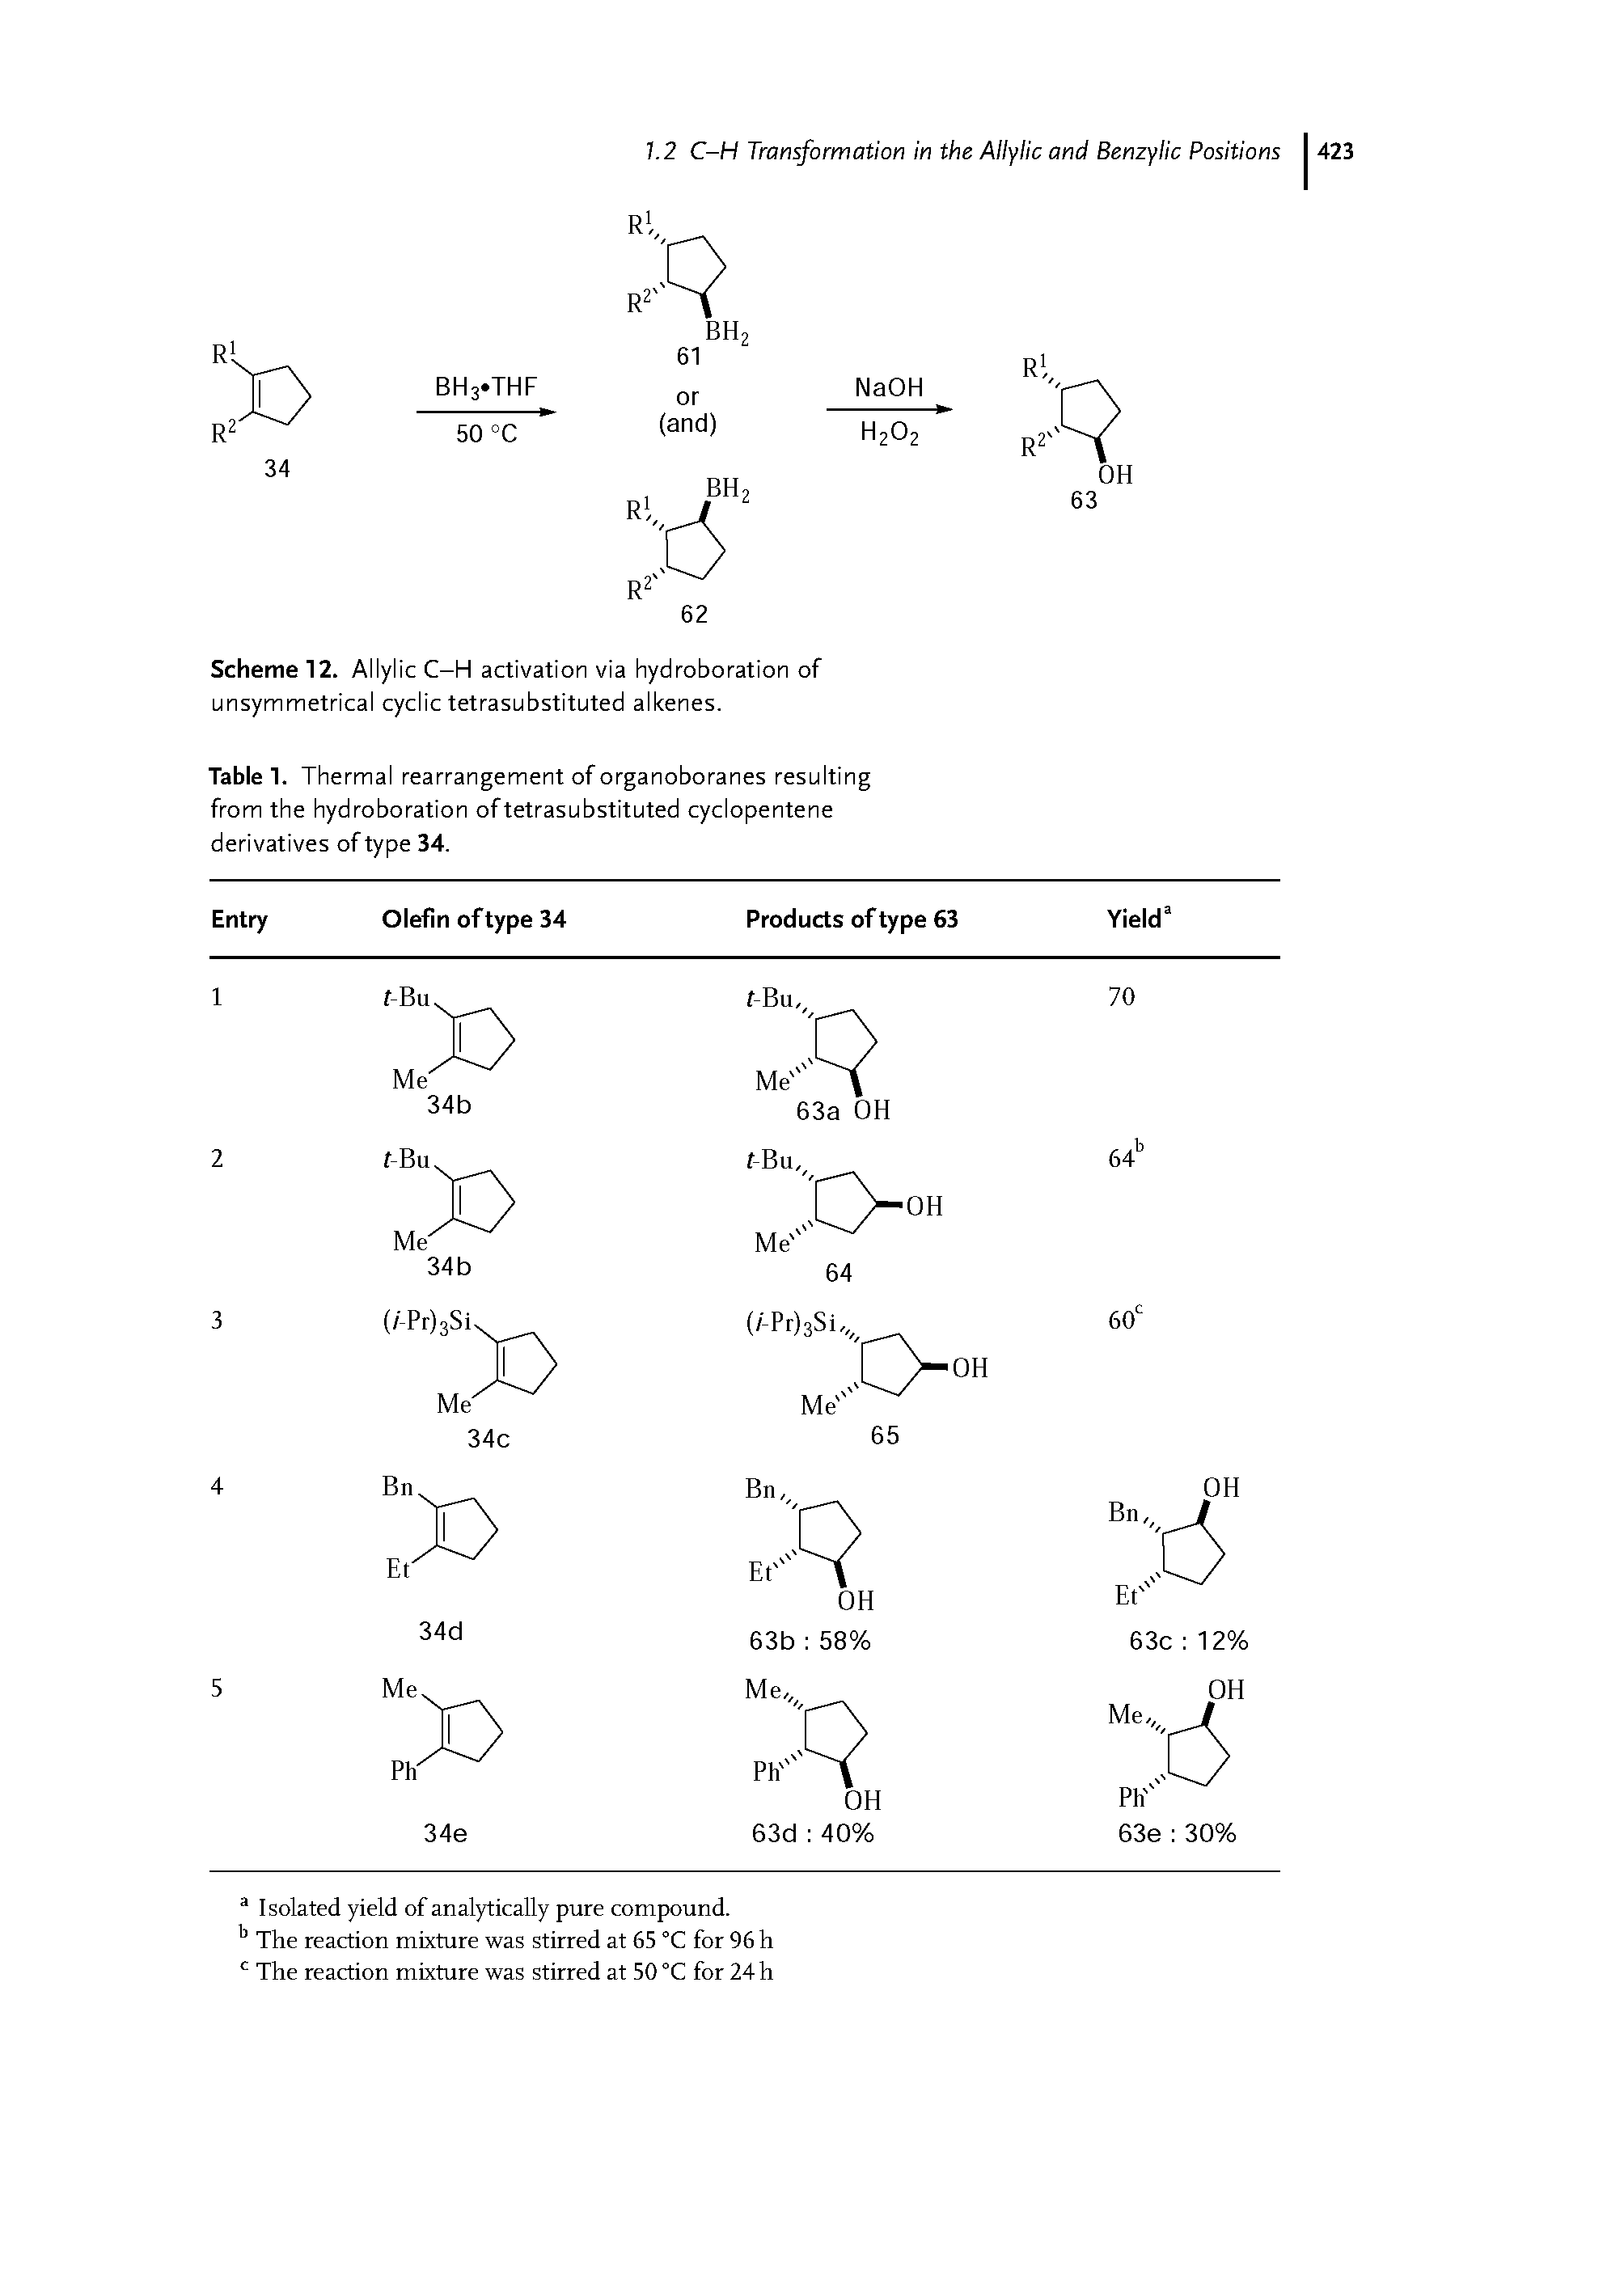 Table 1. Thermal rearrangement of organoboranes resulting from the hydroboration of tetrasubstituted cyclopentene derivatives of type 34.